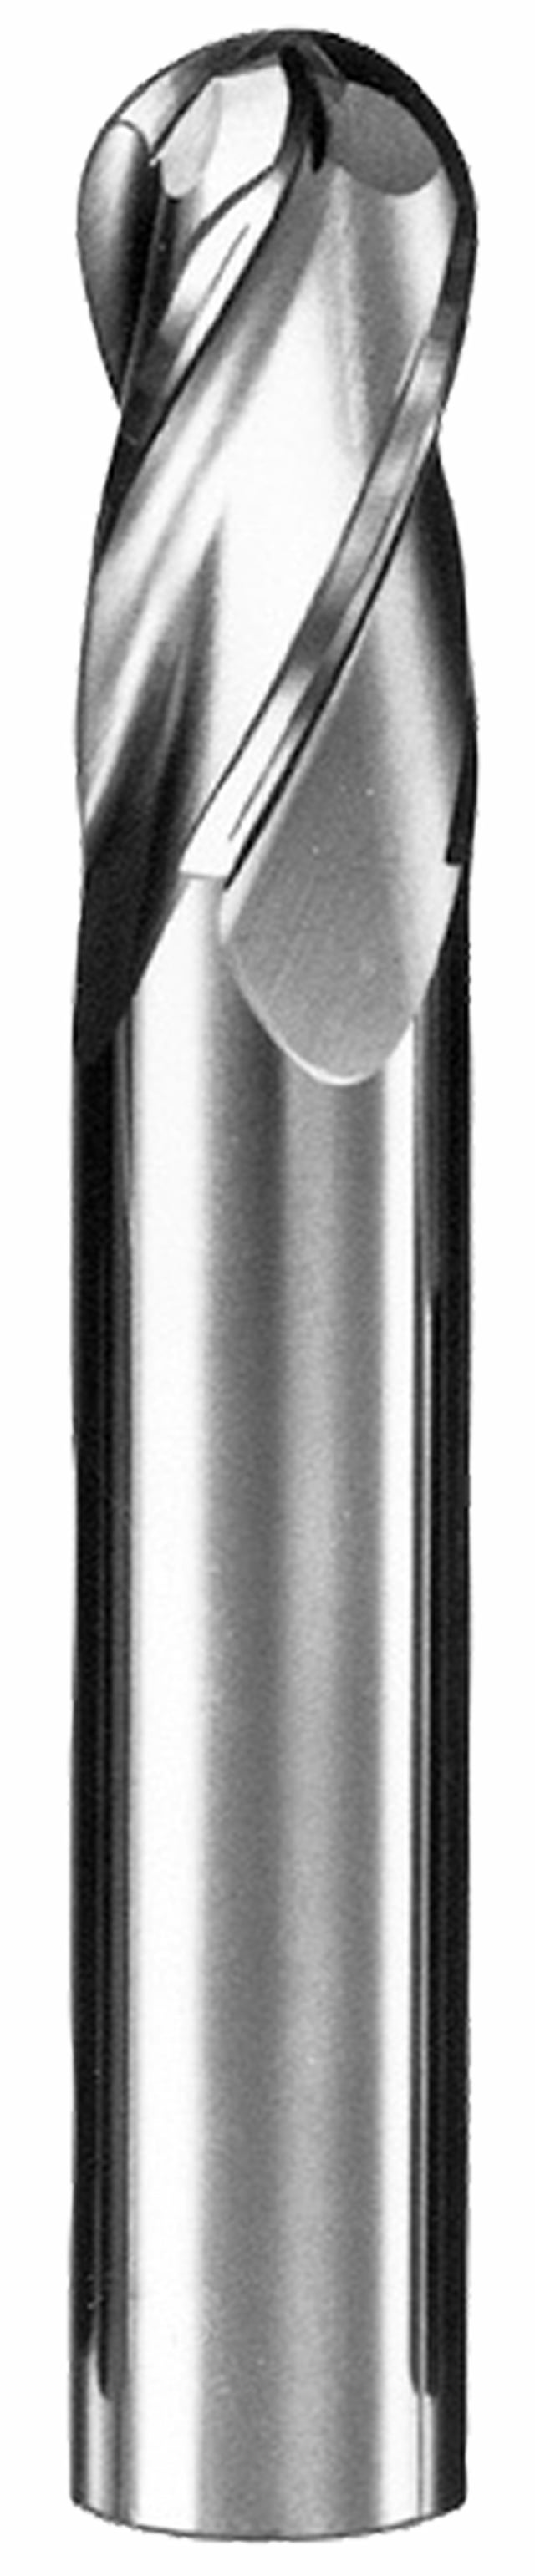 19/64" Dia, 4 Flute, Ball Nose End Mill - 30138